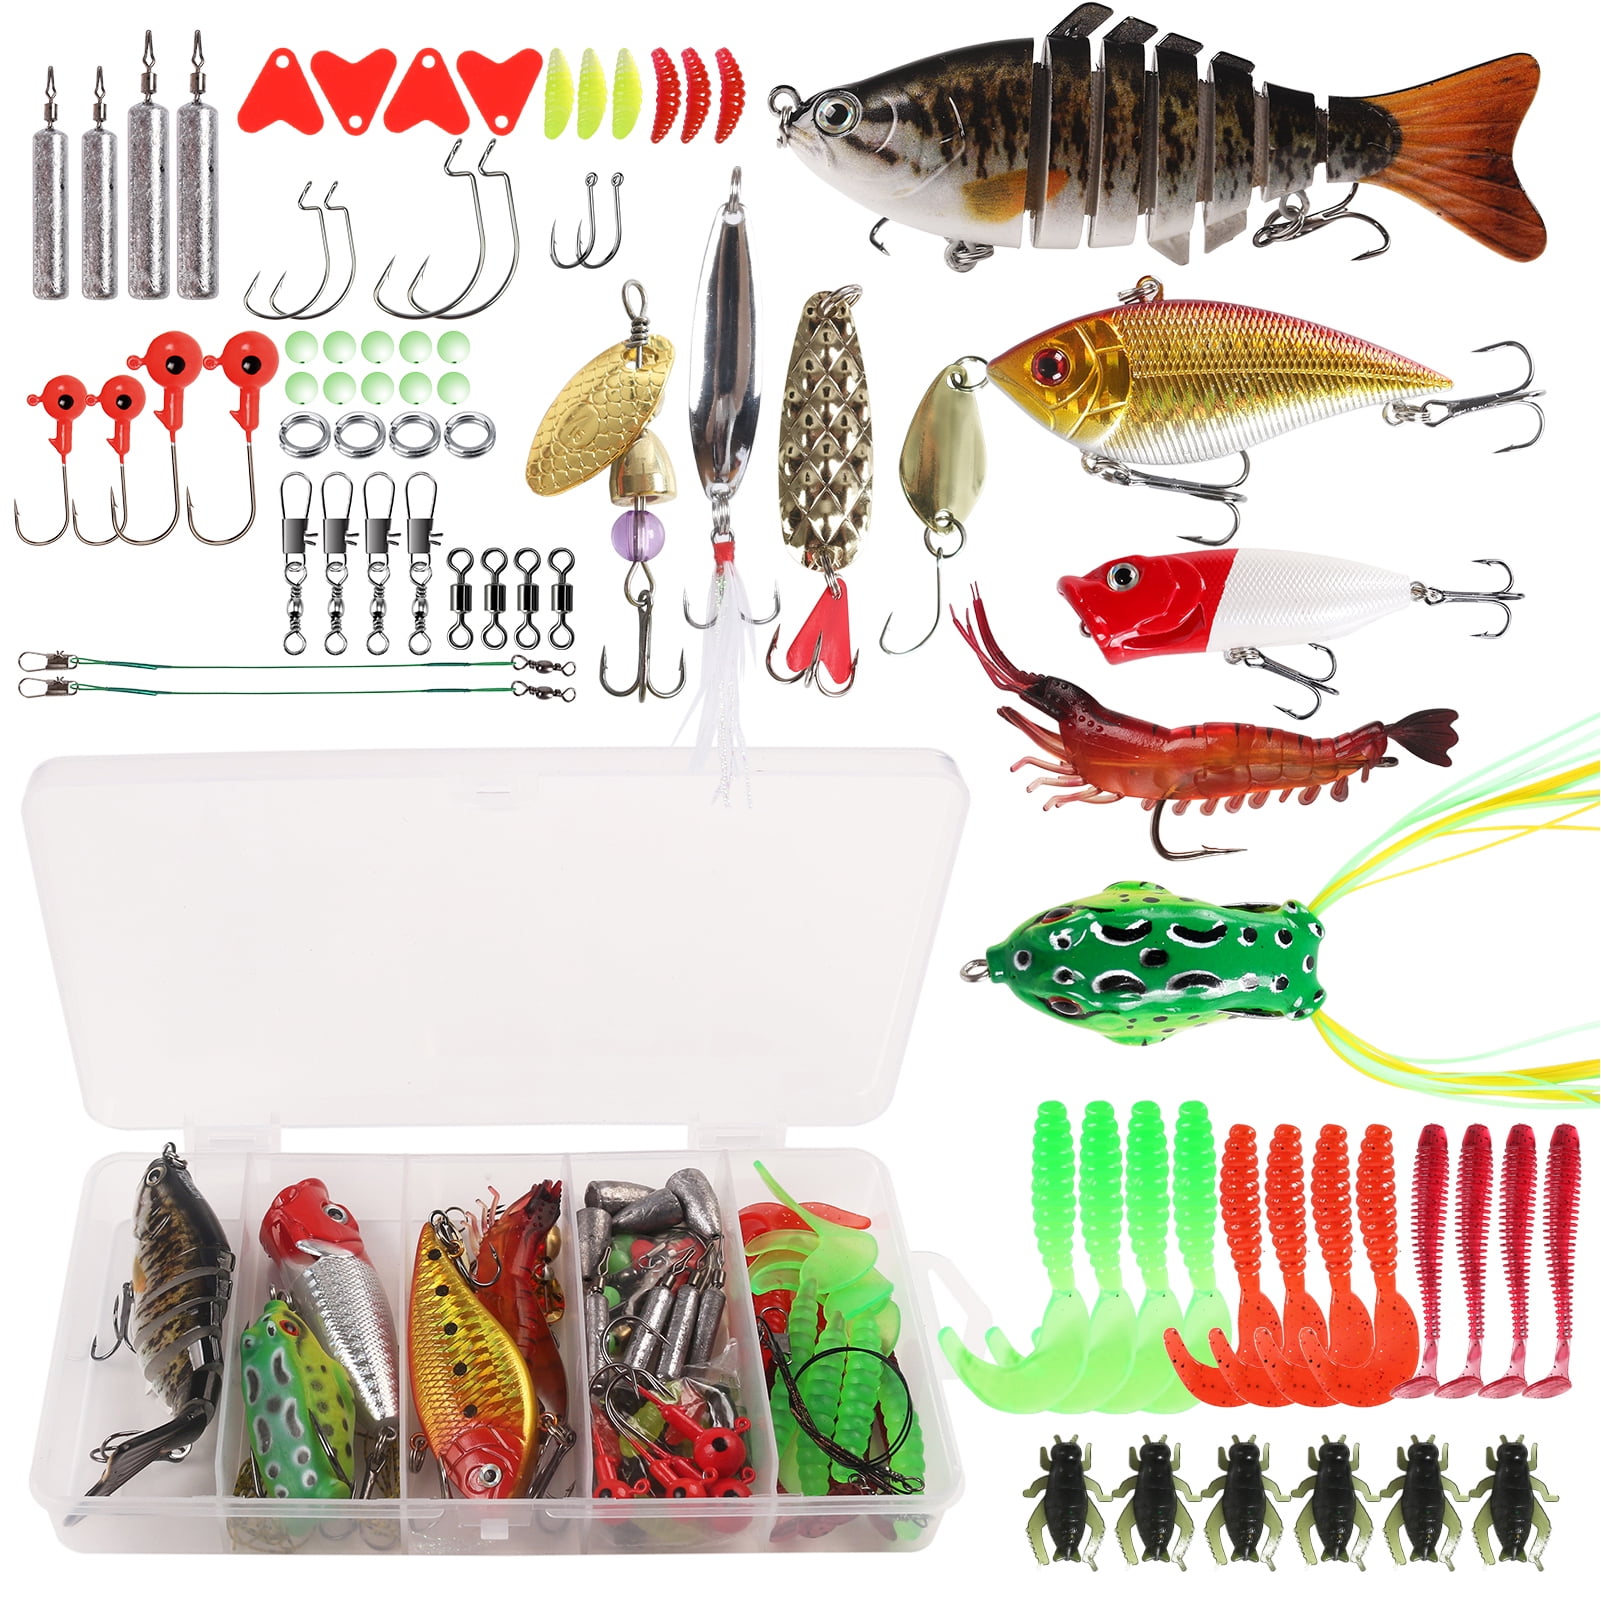 7 Must-Have Fishing Tools And Accessories - Speyside Way